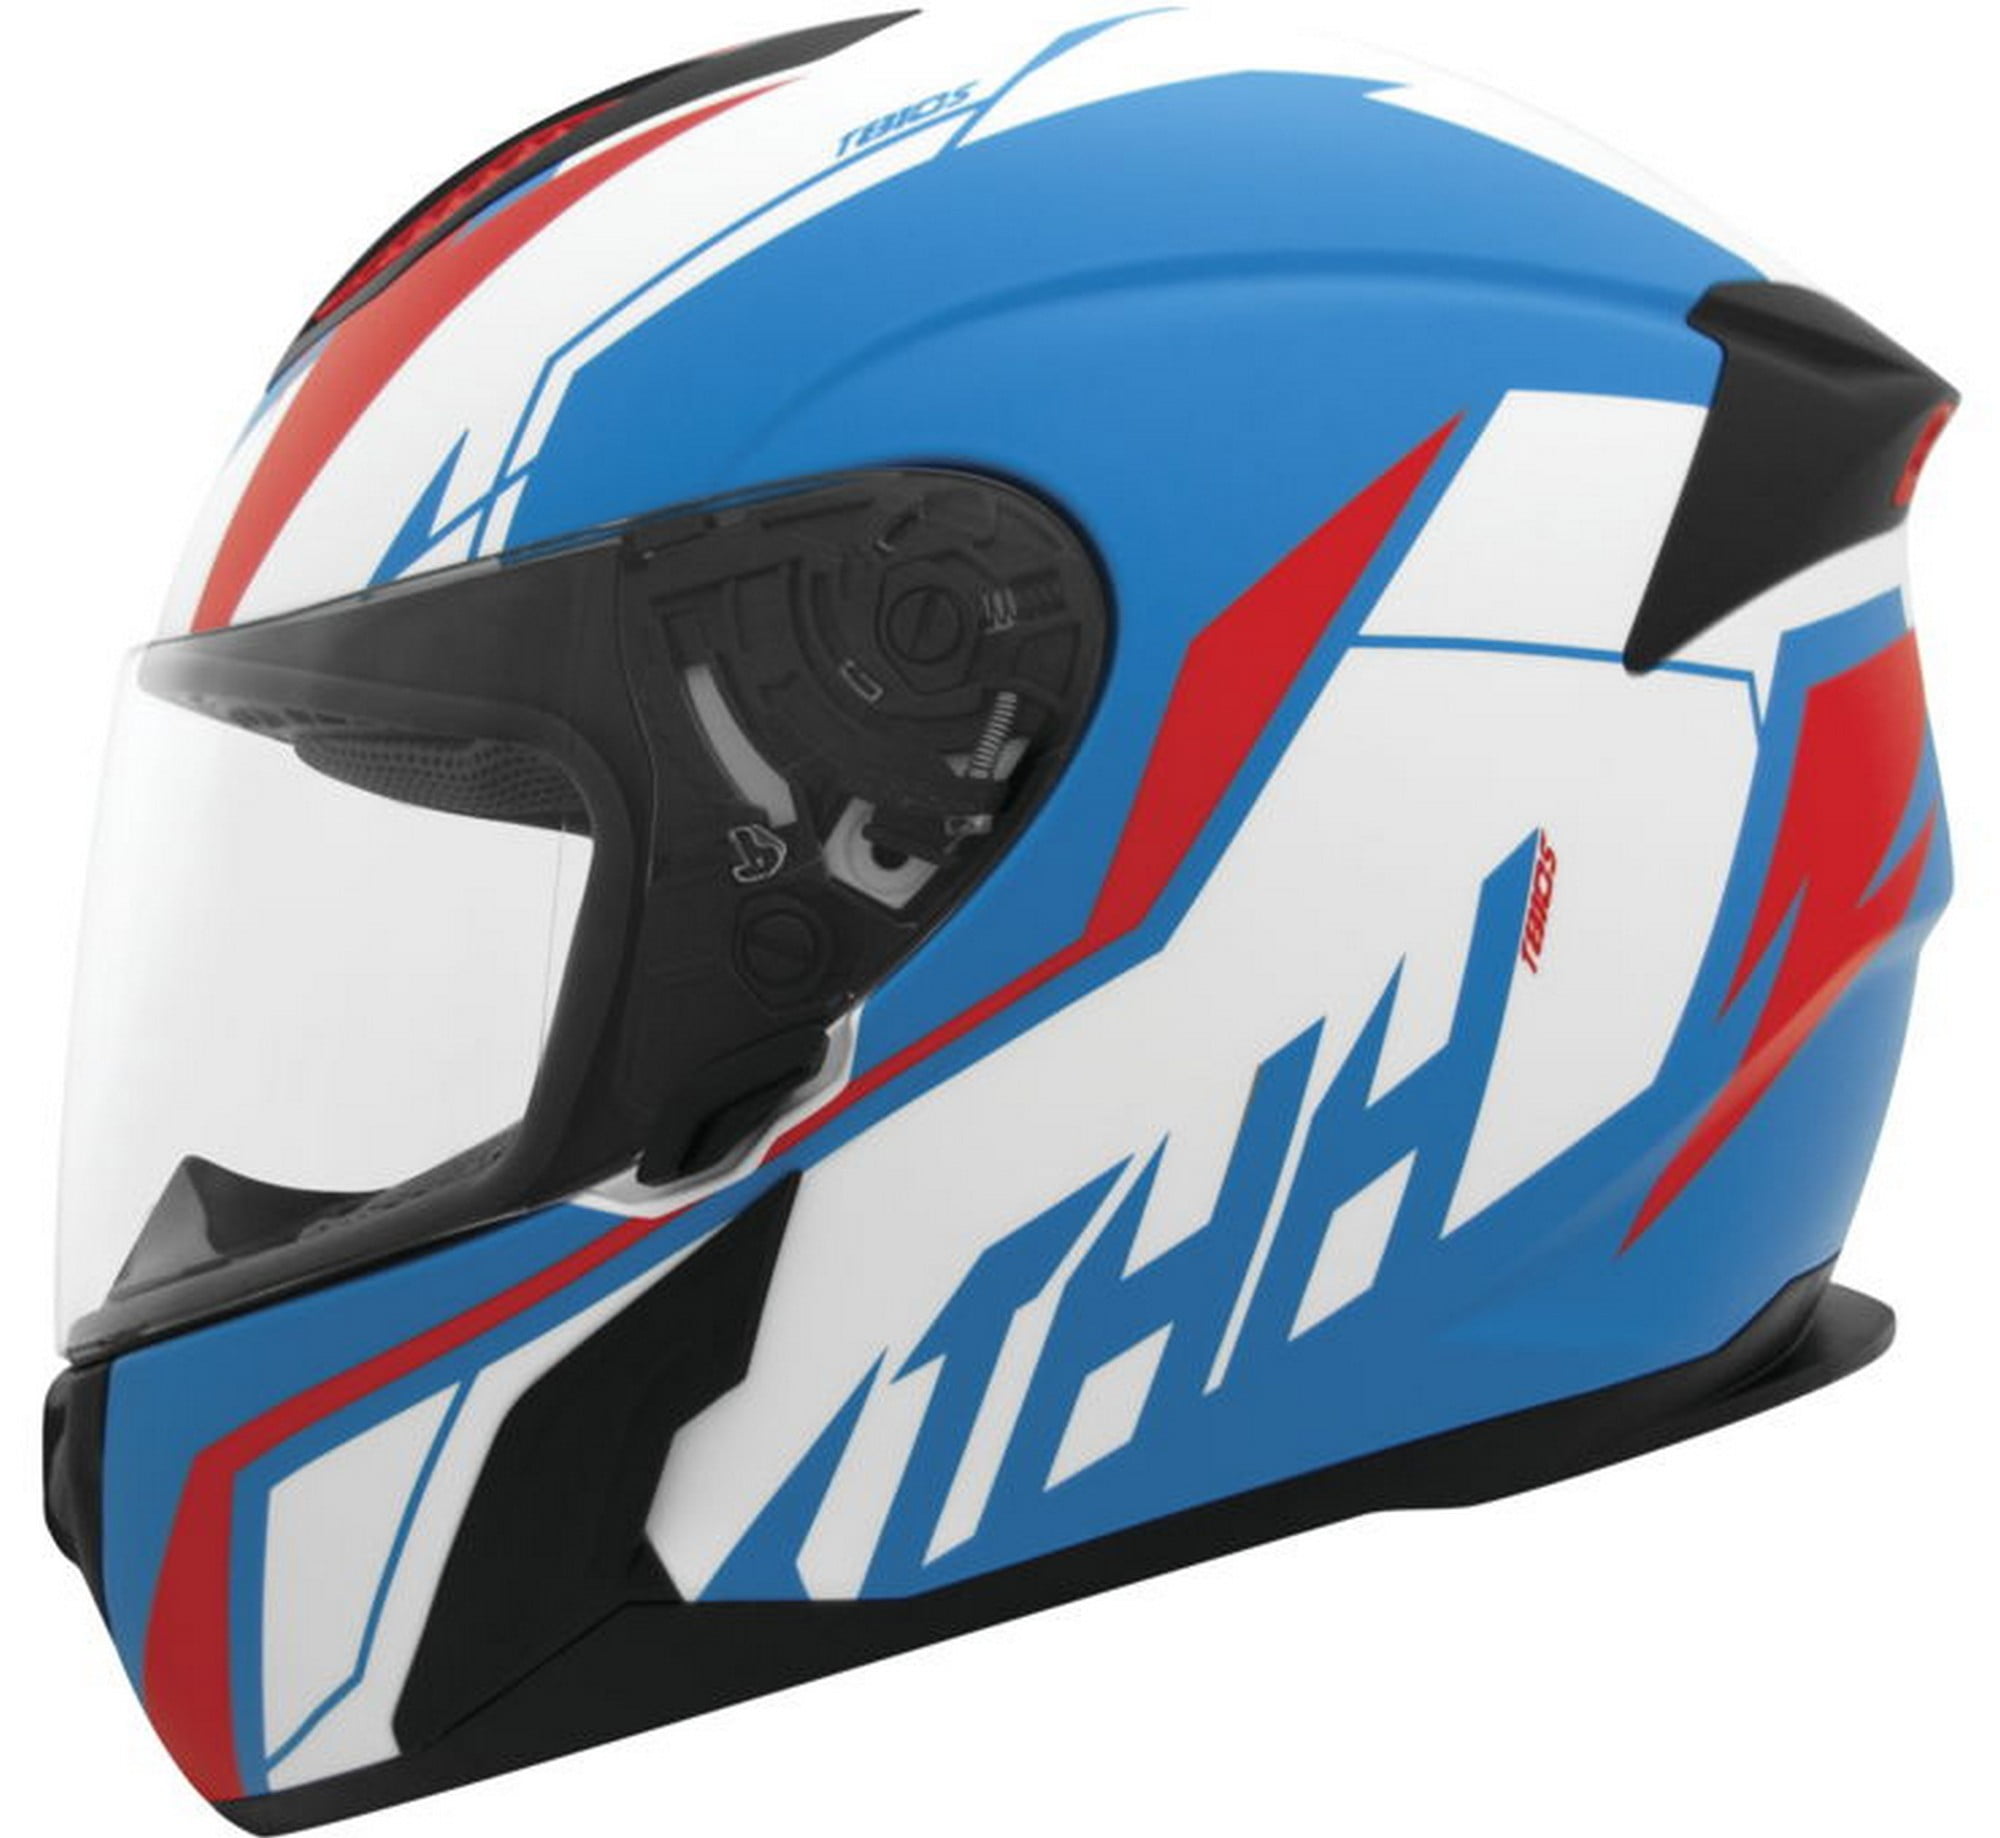 THH T-810S Turbo Motorcycle Helmet Blue/Red XS